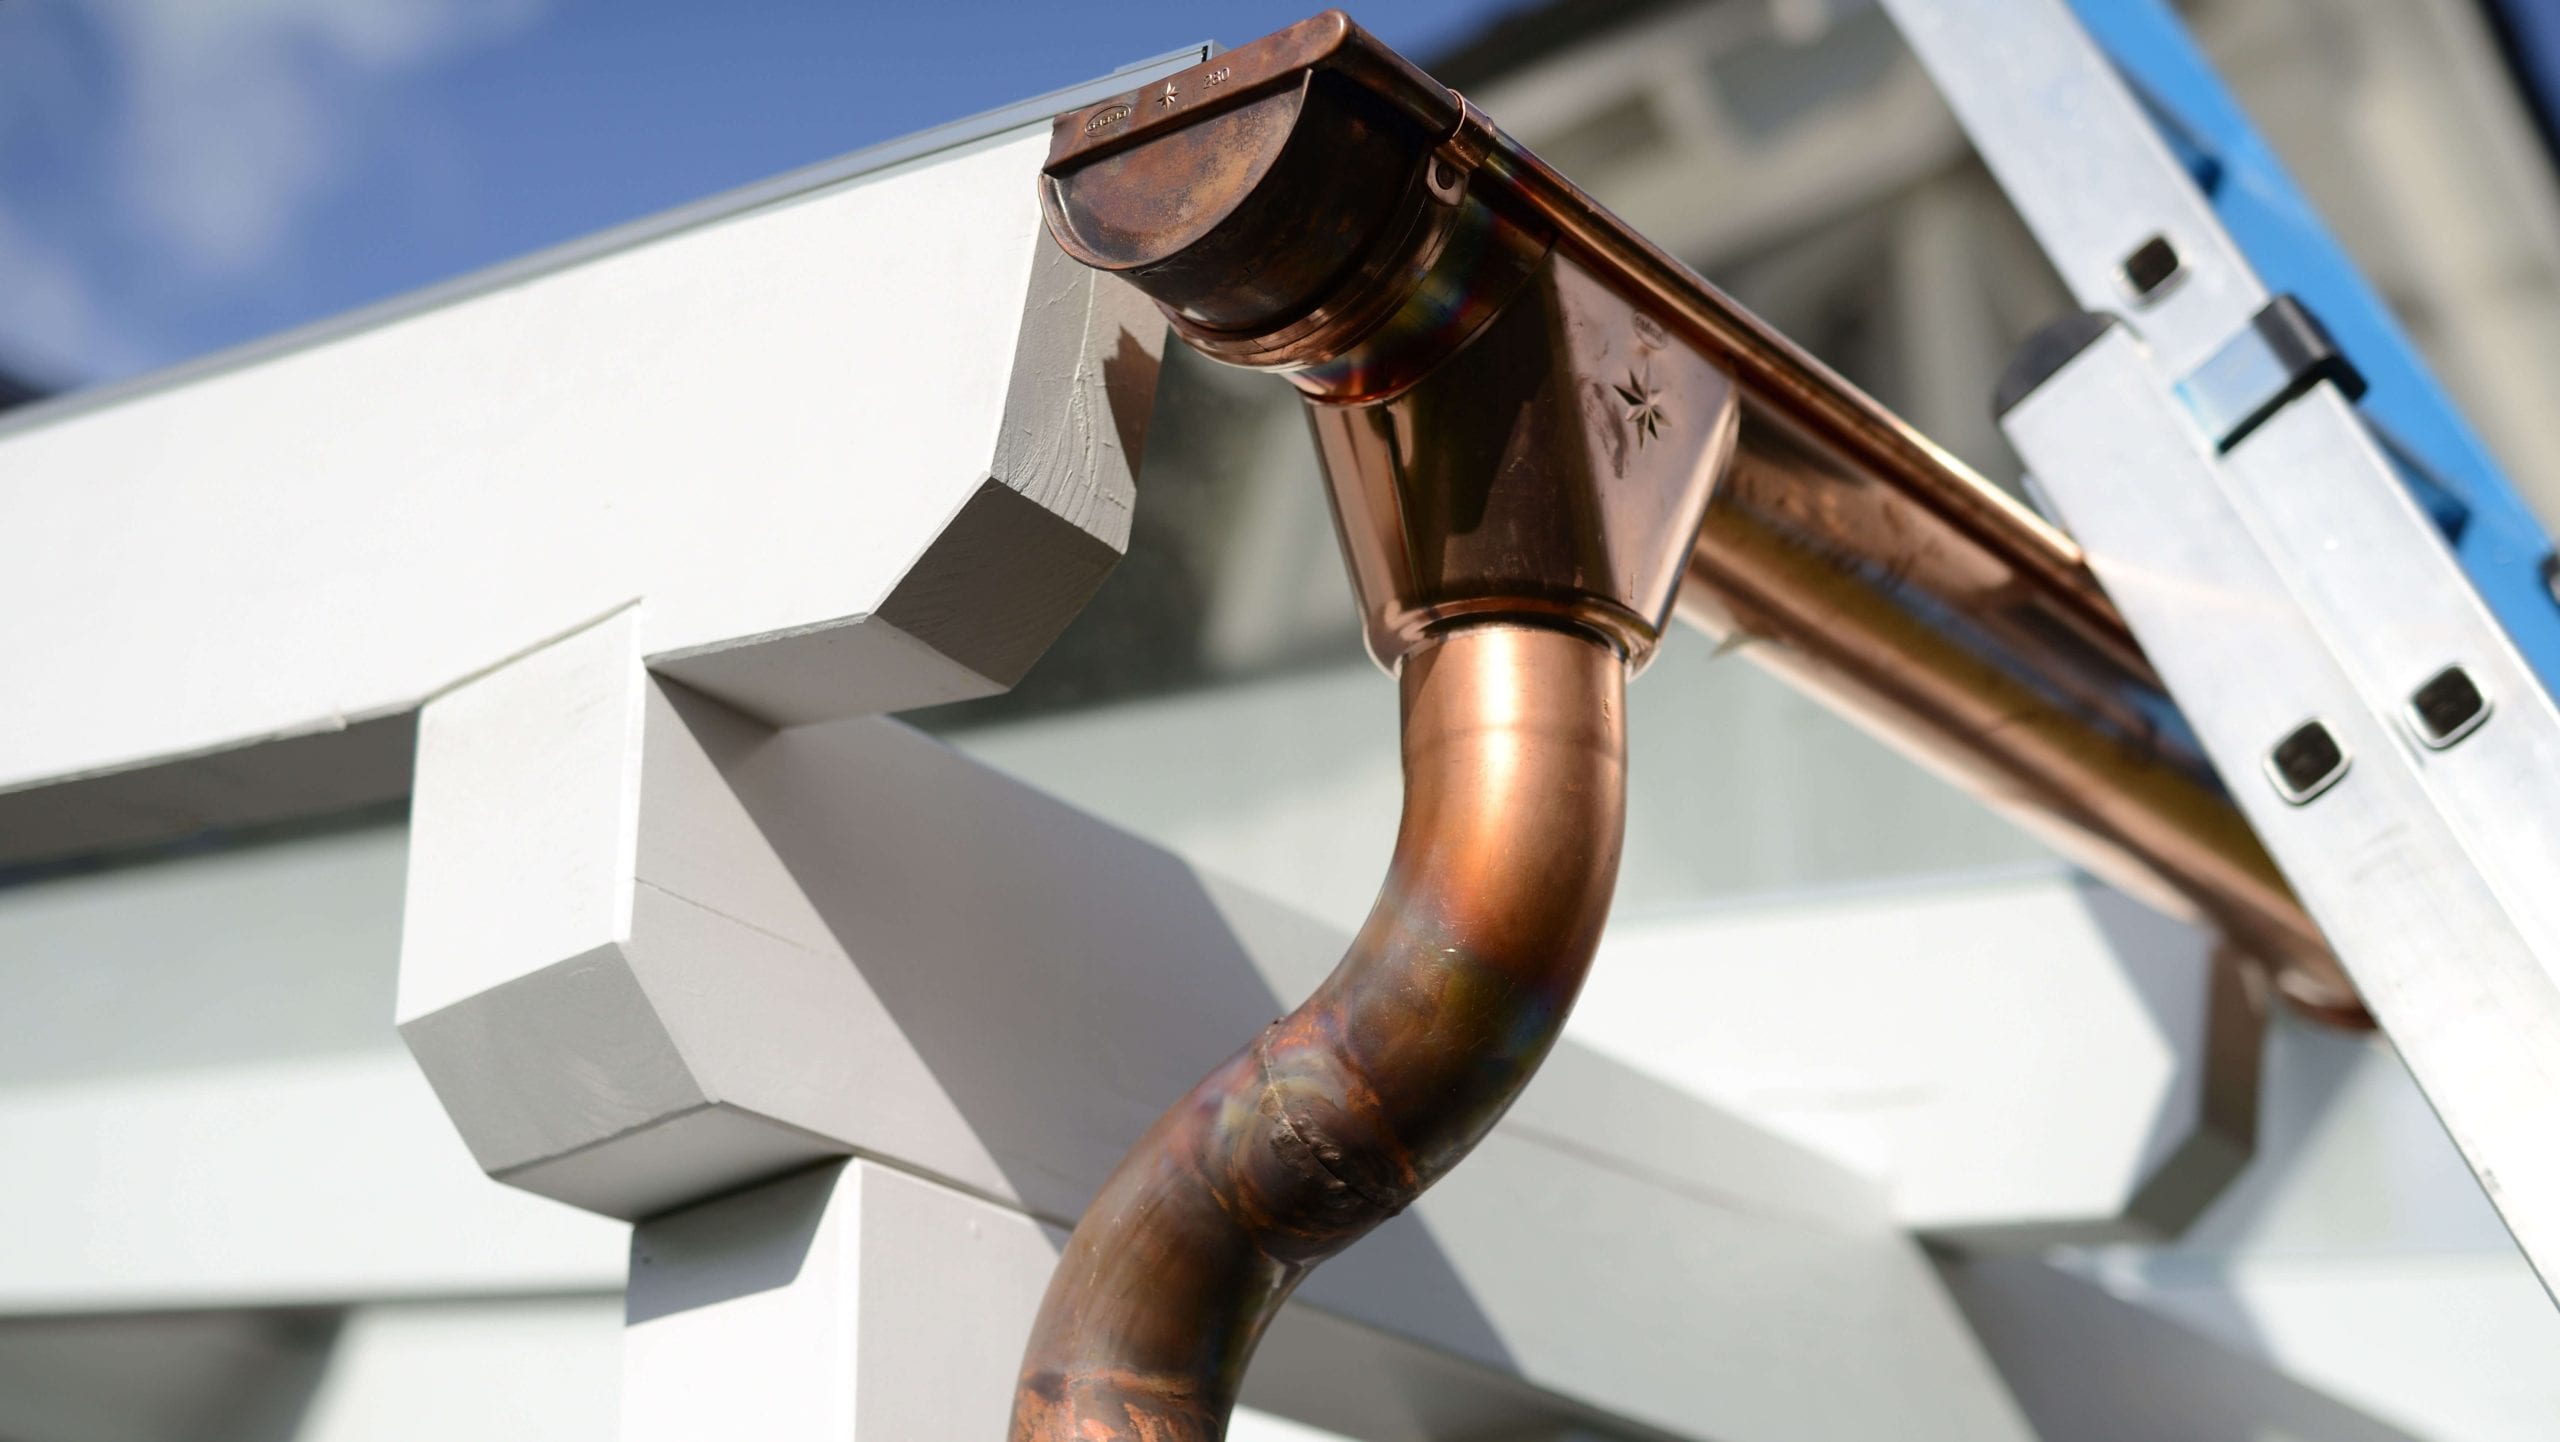 Make your property stand out with copper gutters. Contact for gutter installation in Charlotte